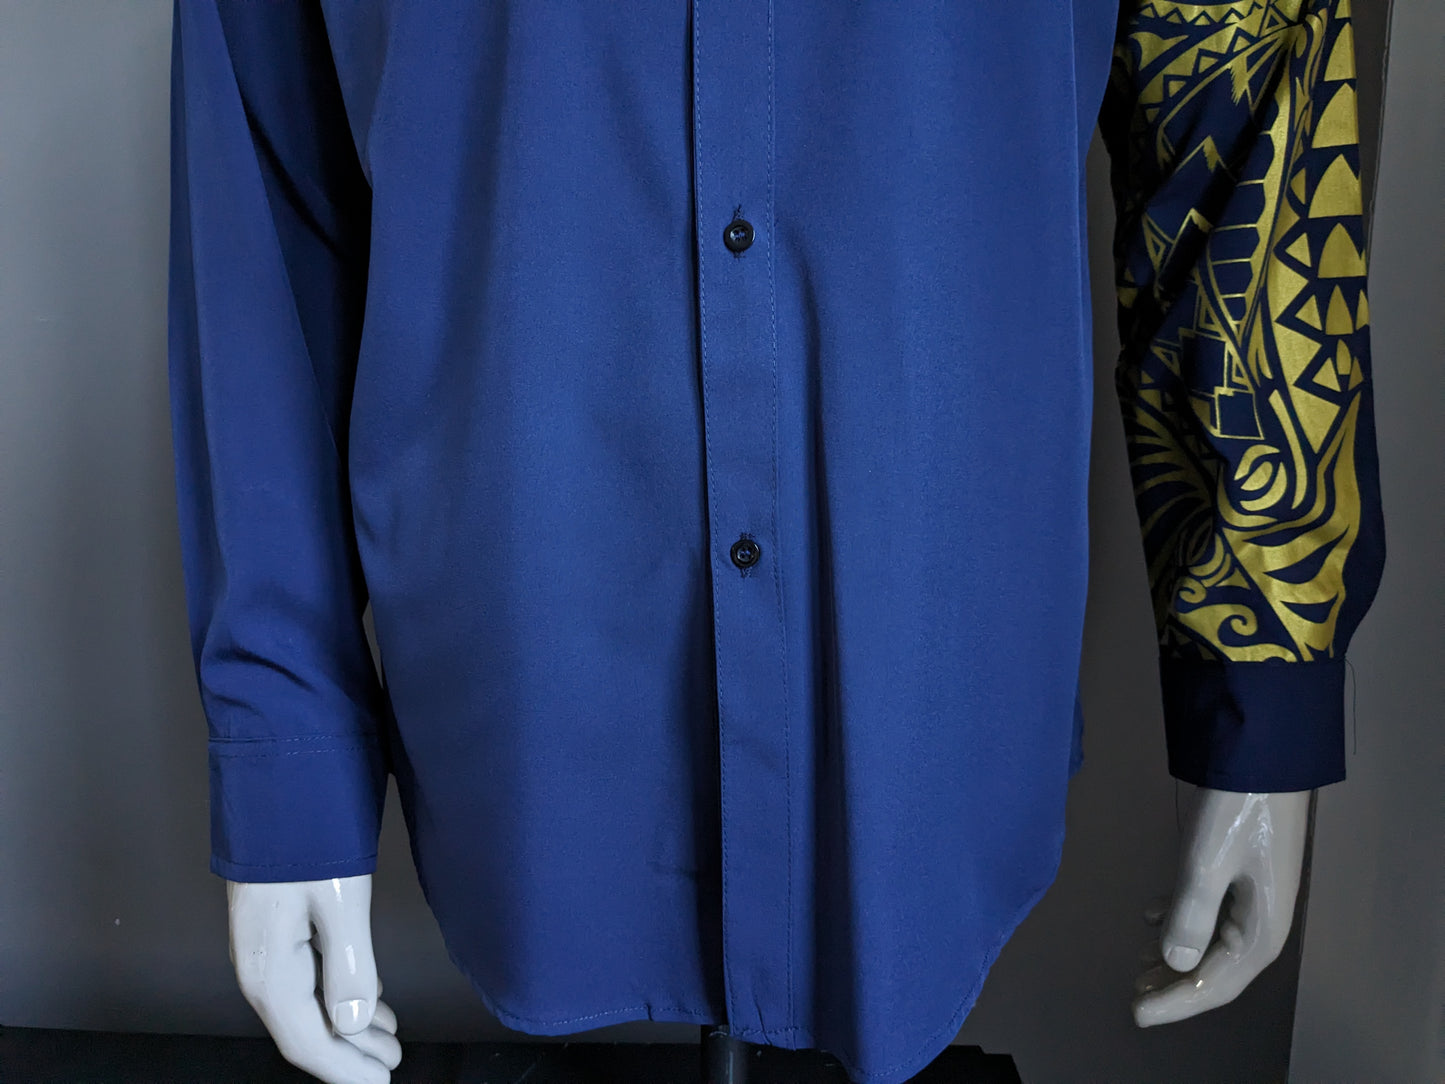 Vintage separate unbranded shirt. Dark blue with gold -colored print on the sleeve. Size L.